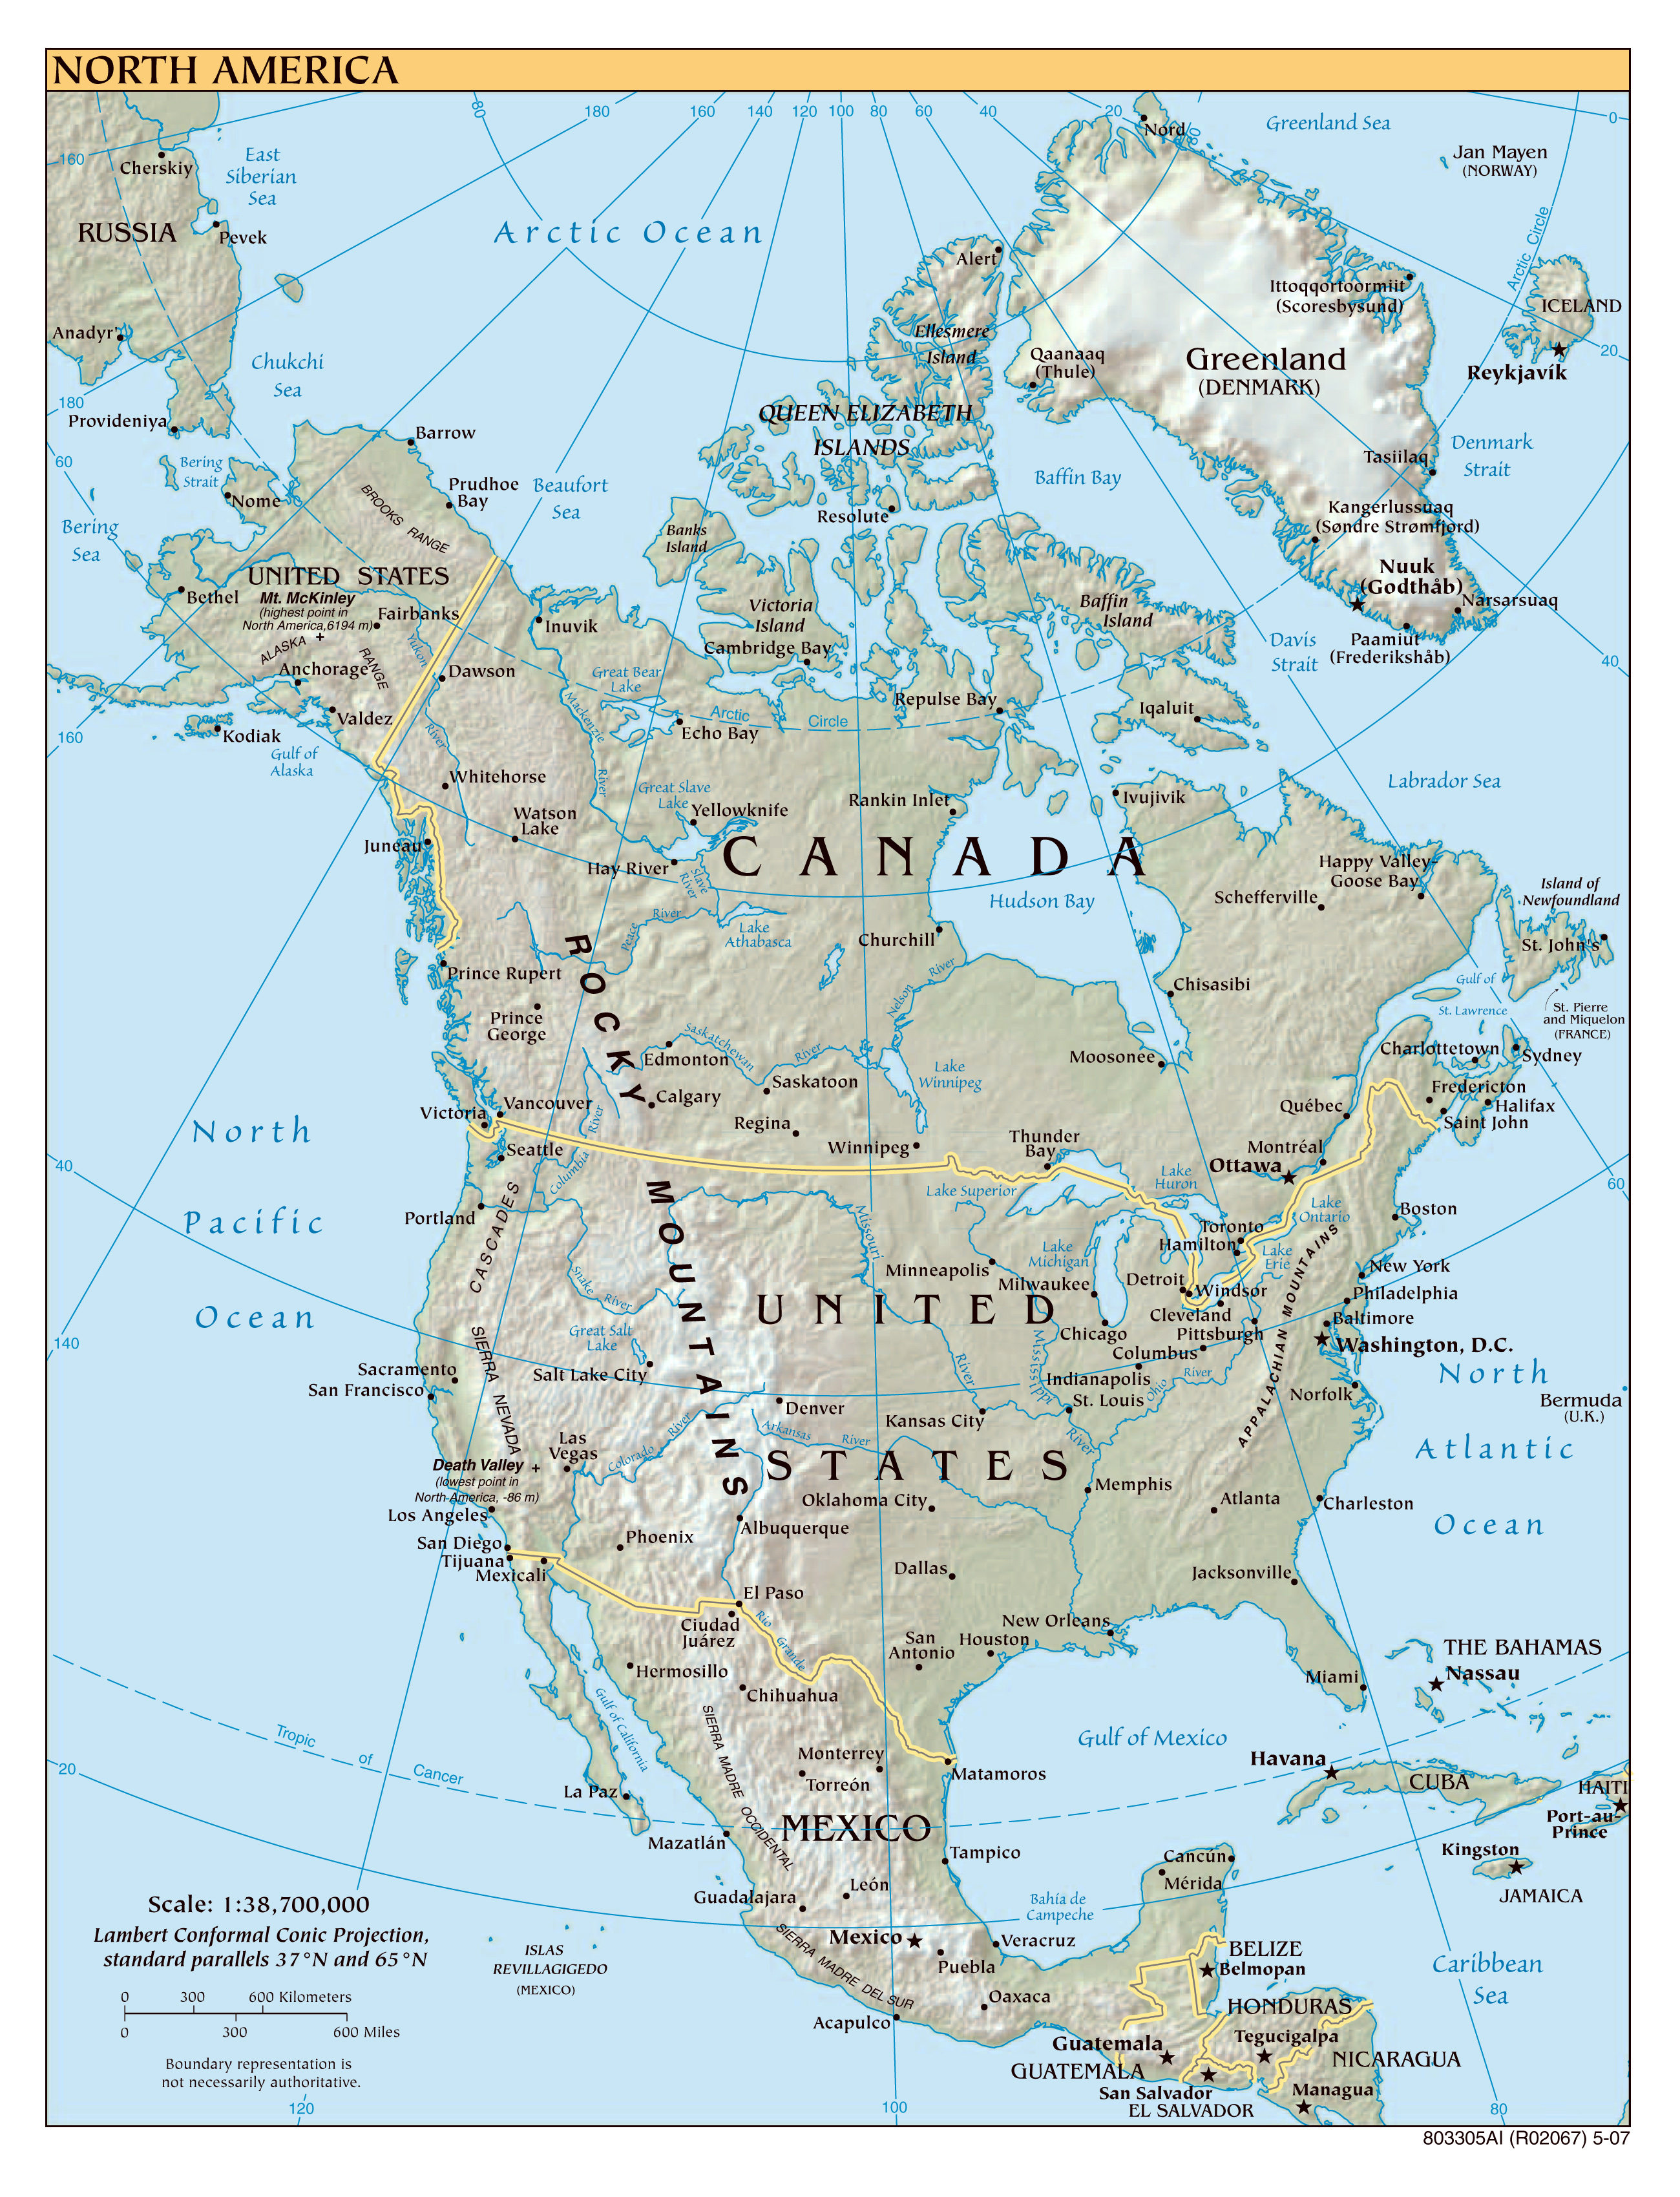 map of north america with major cities North America Large Detailed Political Map With Relief All map of north america with major cities